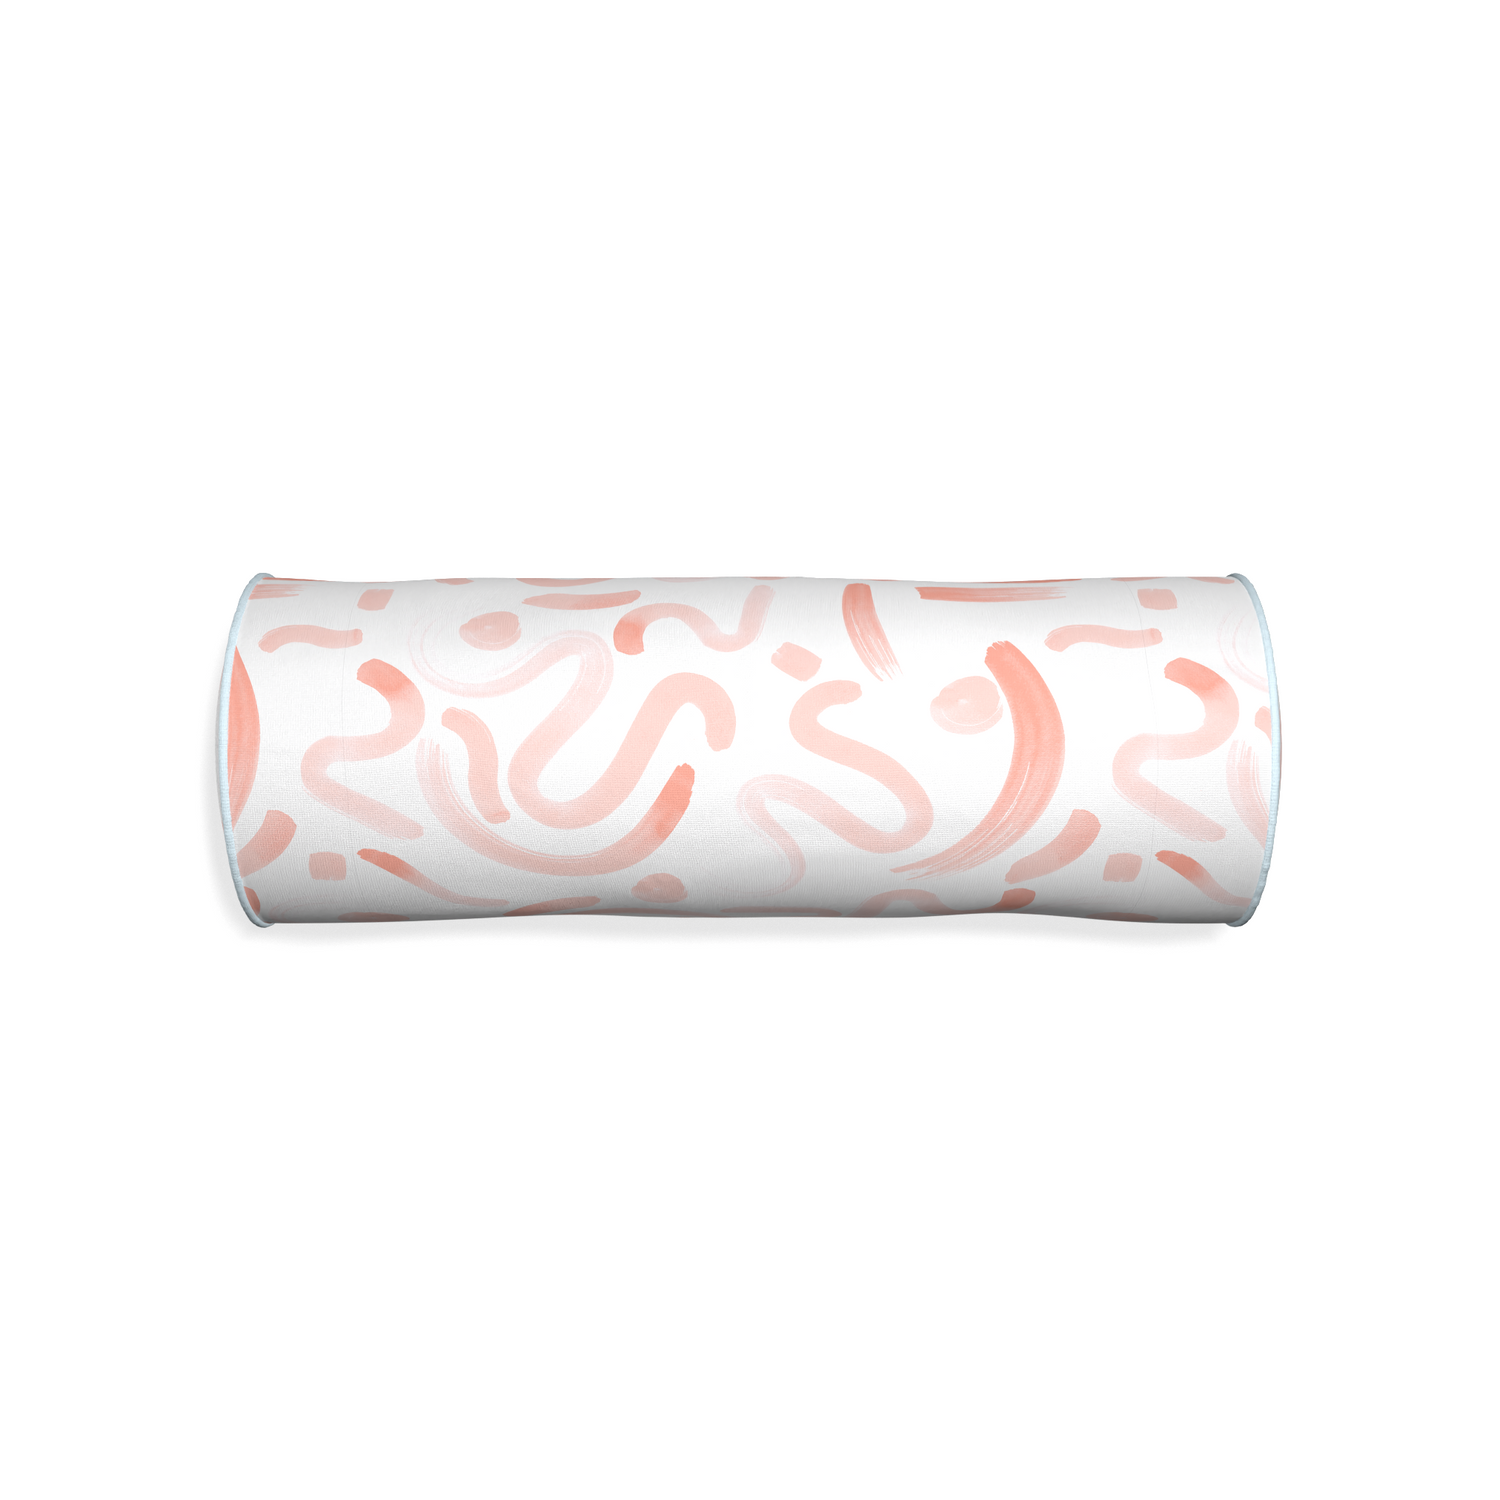 Bolster hockney pink custom pillow with powder piping on white background